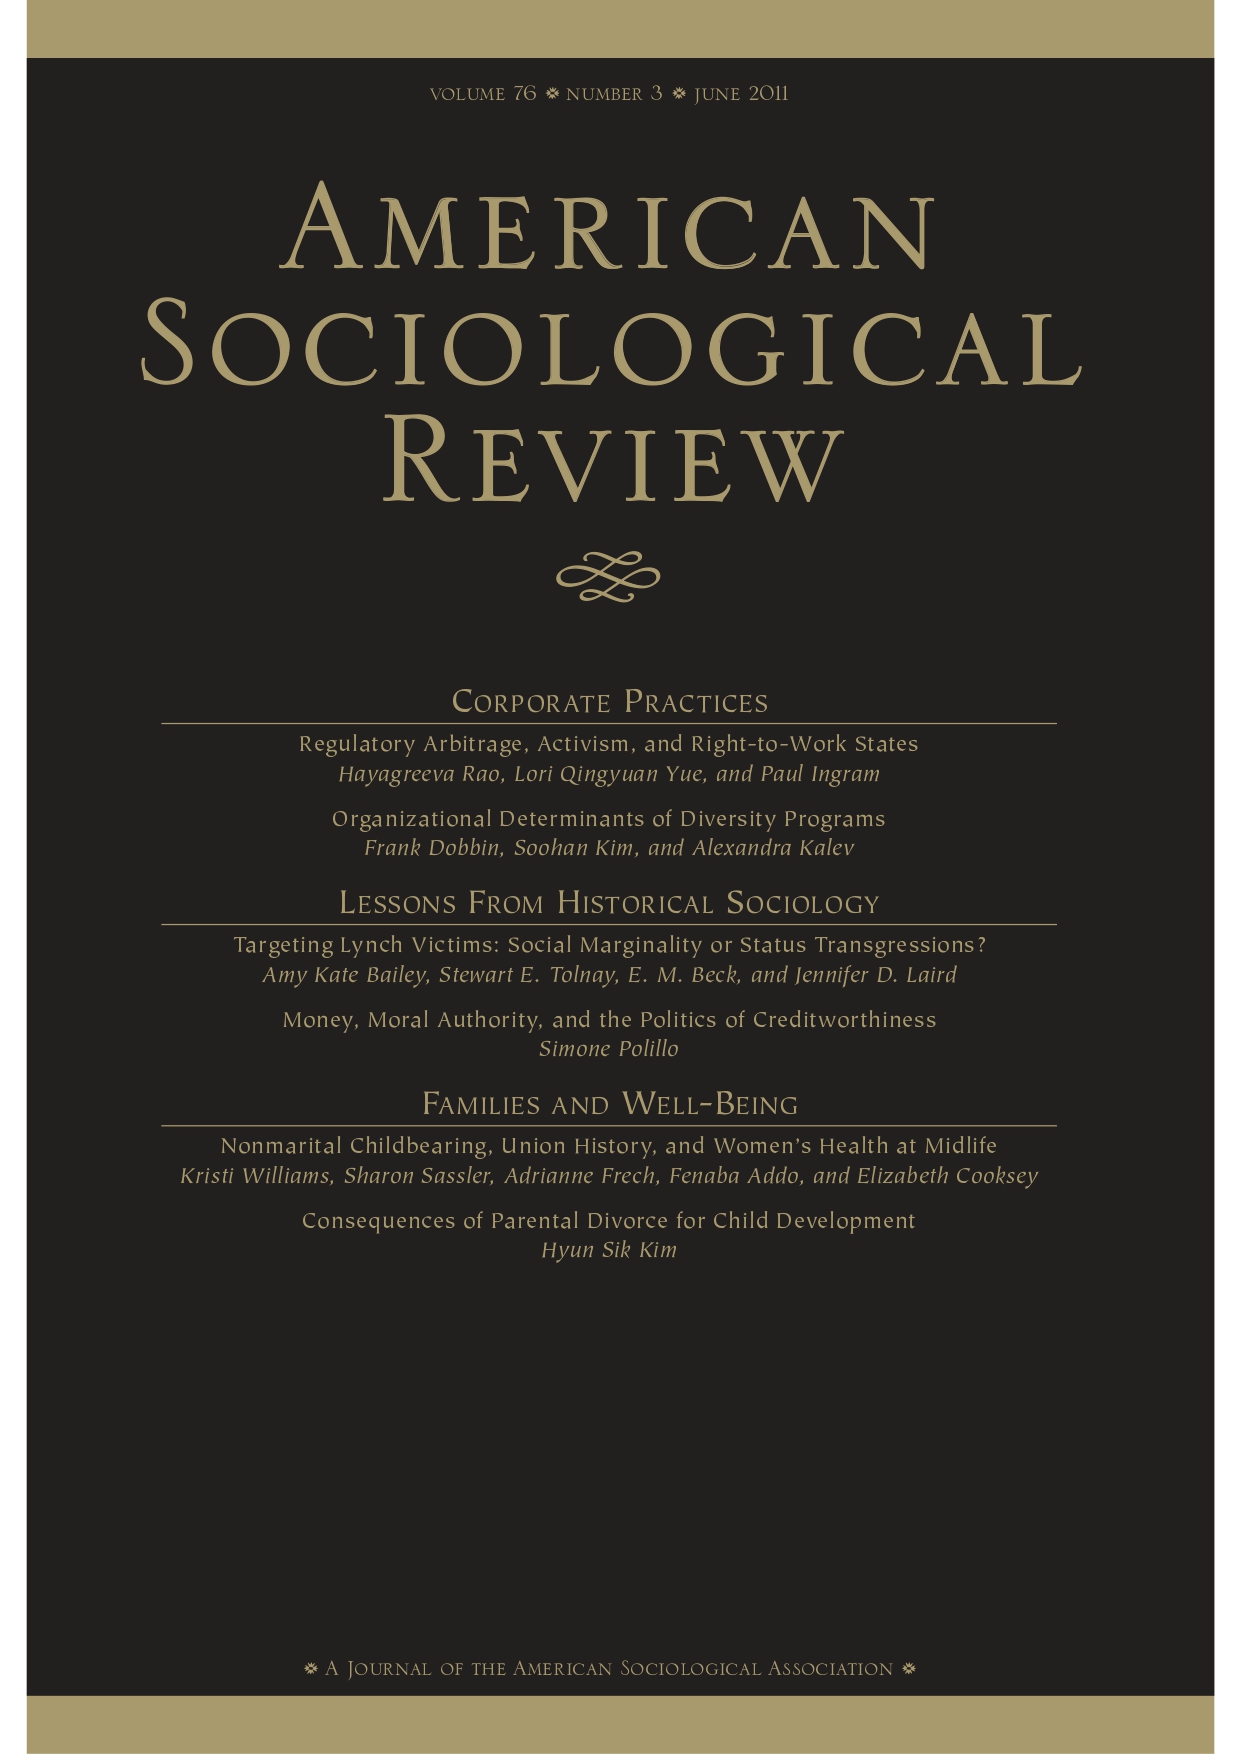 American Sociological Review